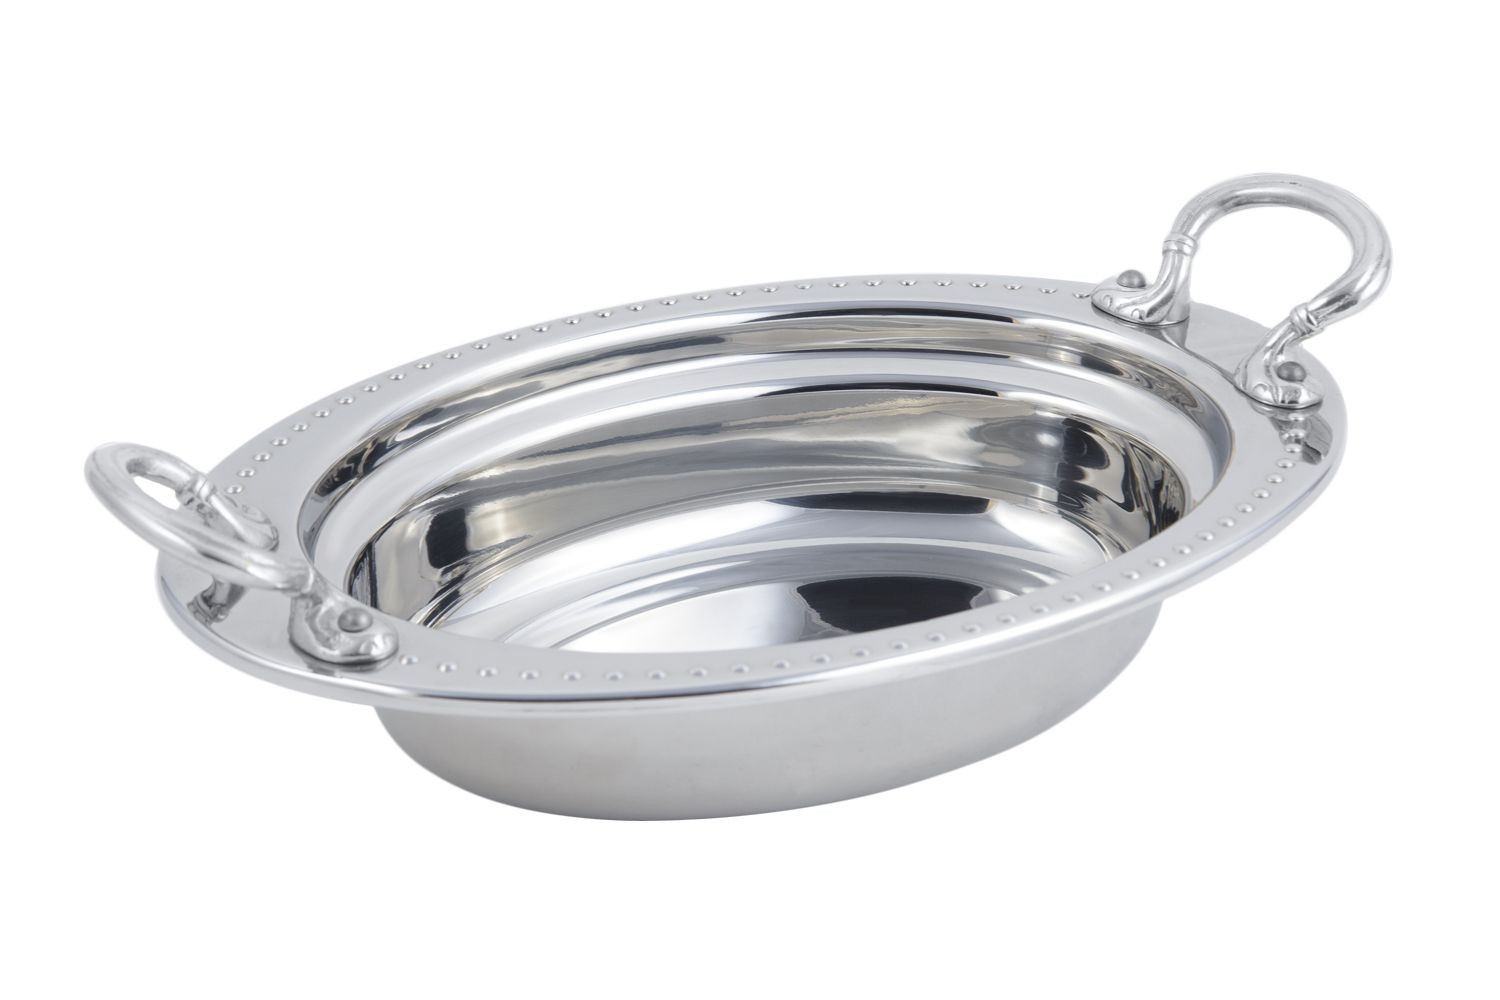 Bon Chef 5304HRSS Bolero Design Oval Food Pan with Round Stainless Steel Handles, 2 Qt.